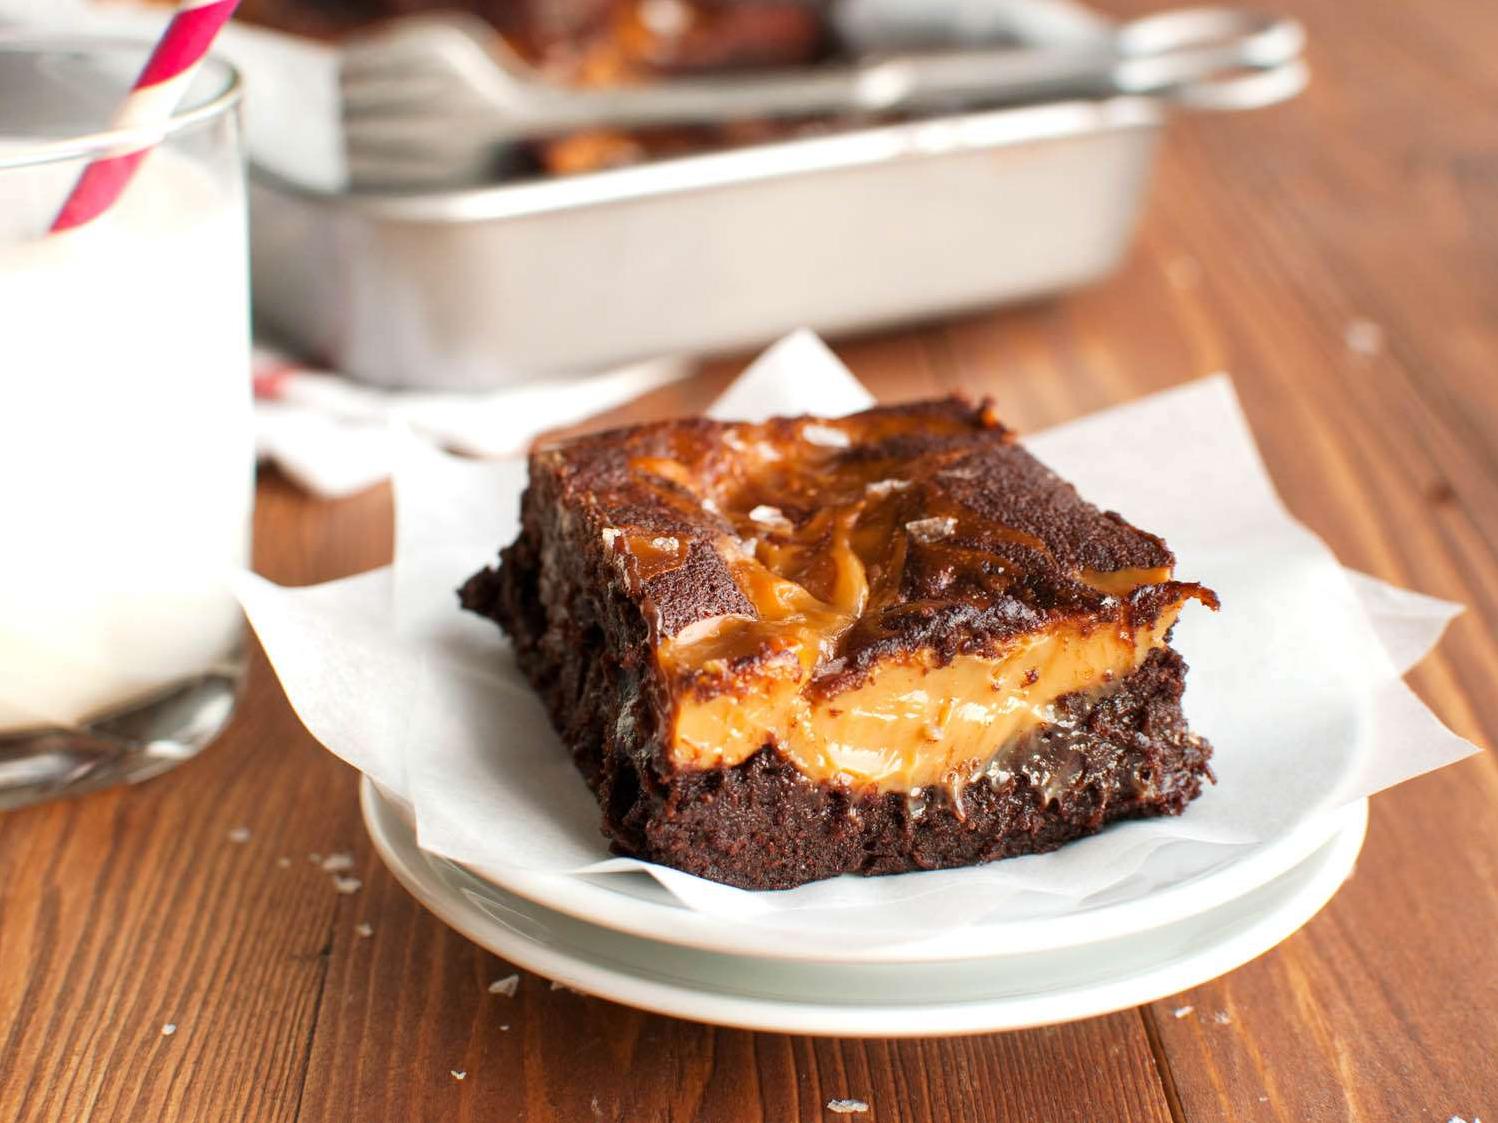  Velvety, caramel-y Dulce de Leche drizzled over rich chocolate brownies? Yes, please!